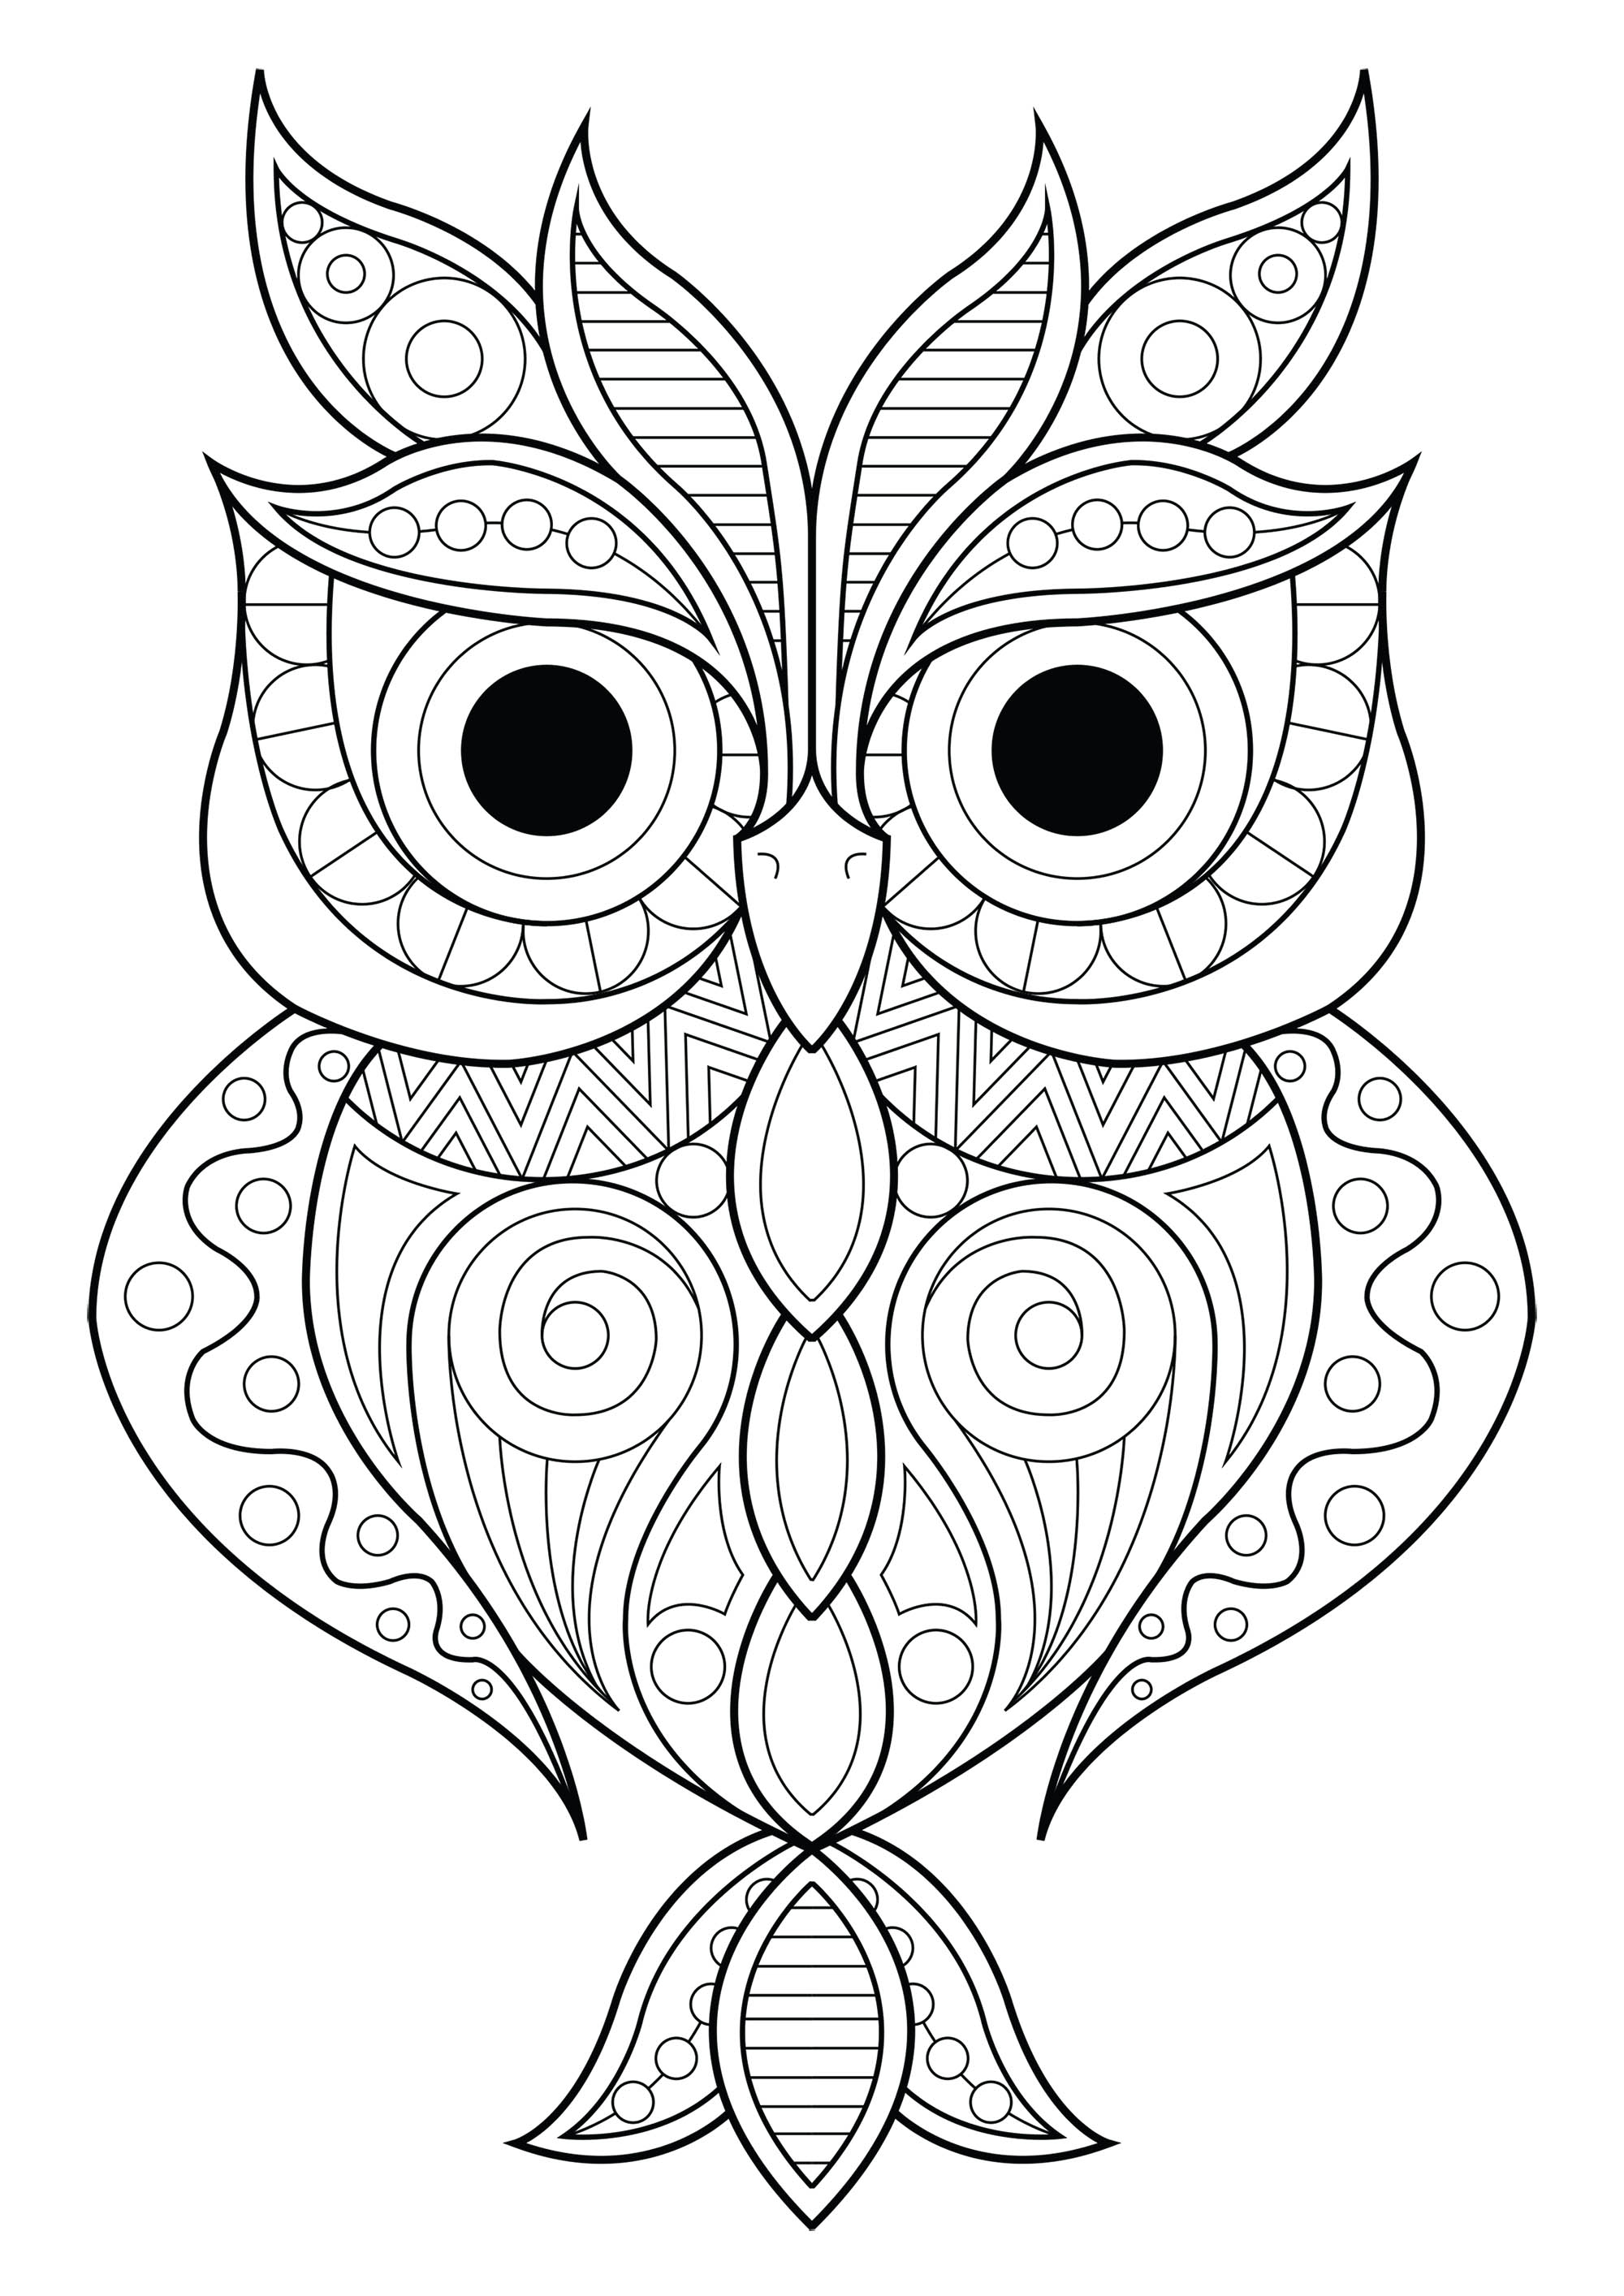 Owl simple patterns 20   Owls Adult Coloring Pages